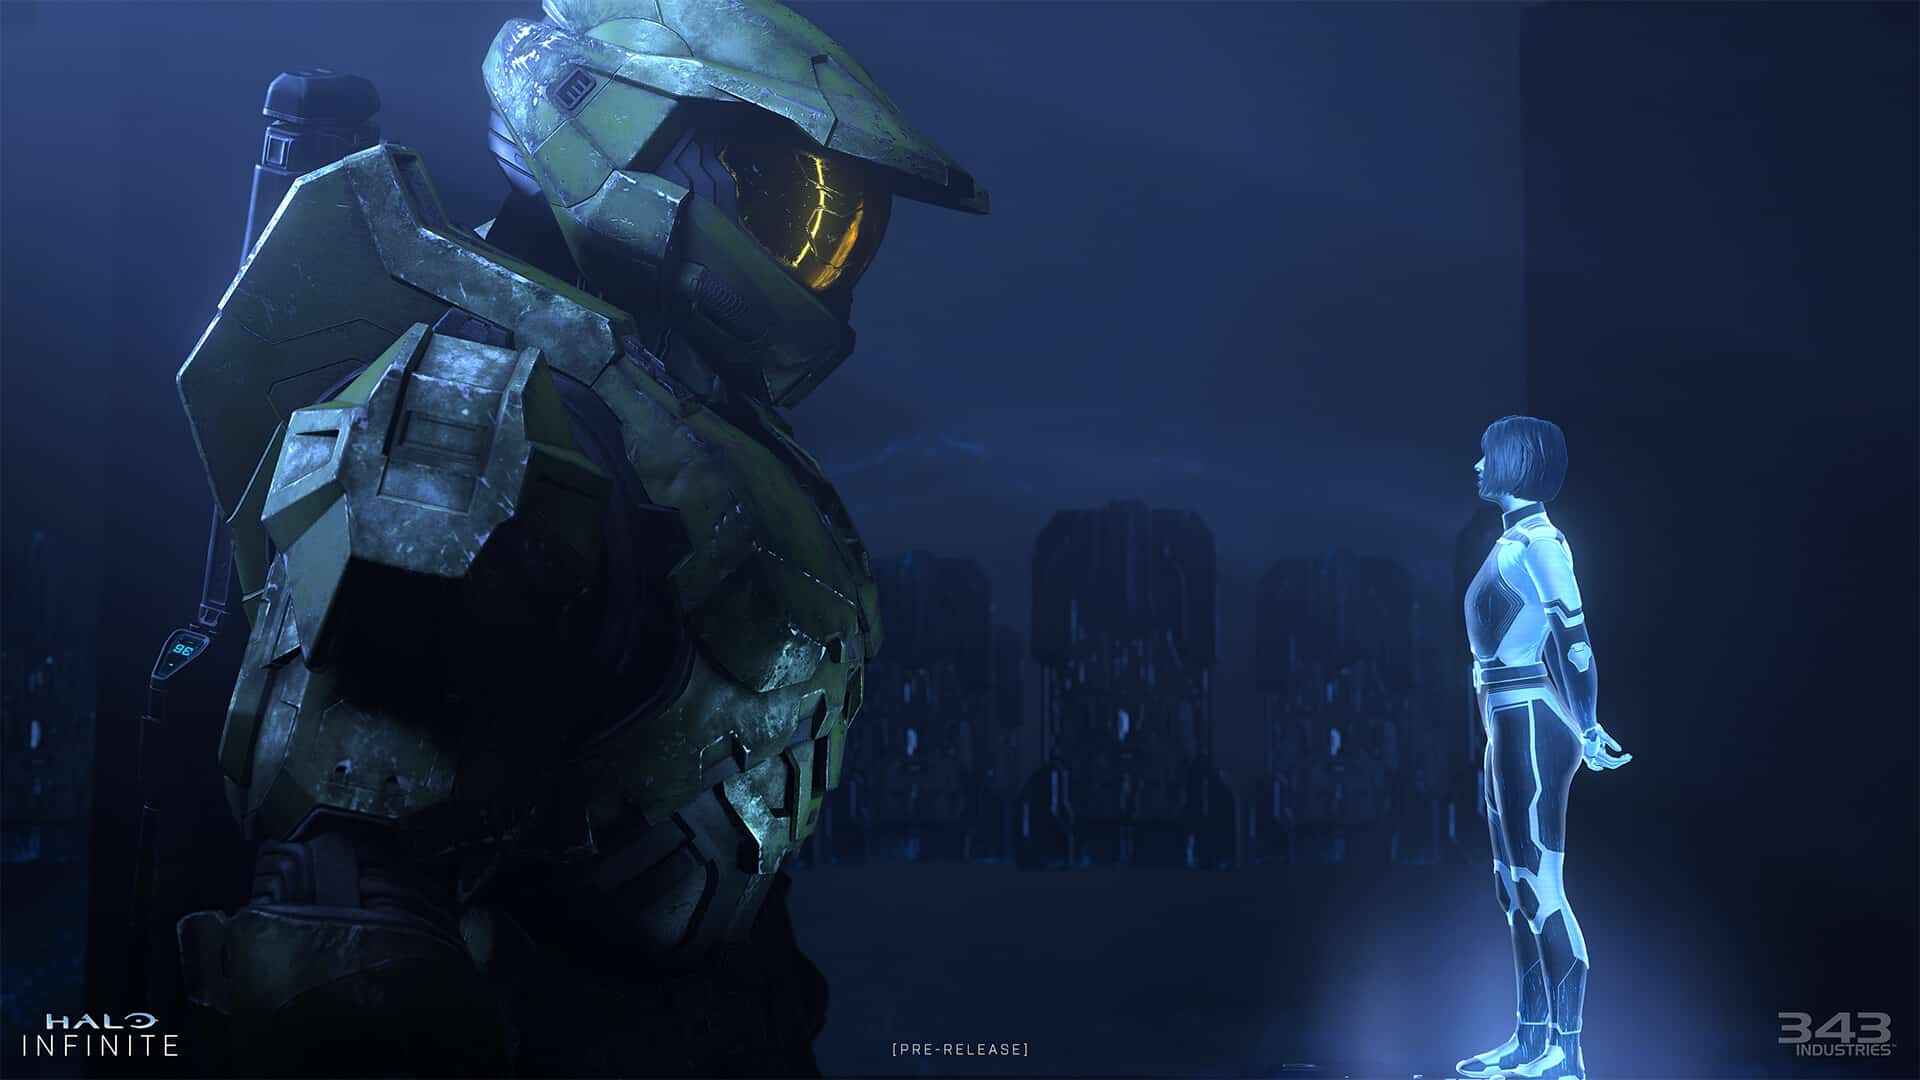 Halo Infinite Season 6 Release Date: When is it coming out